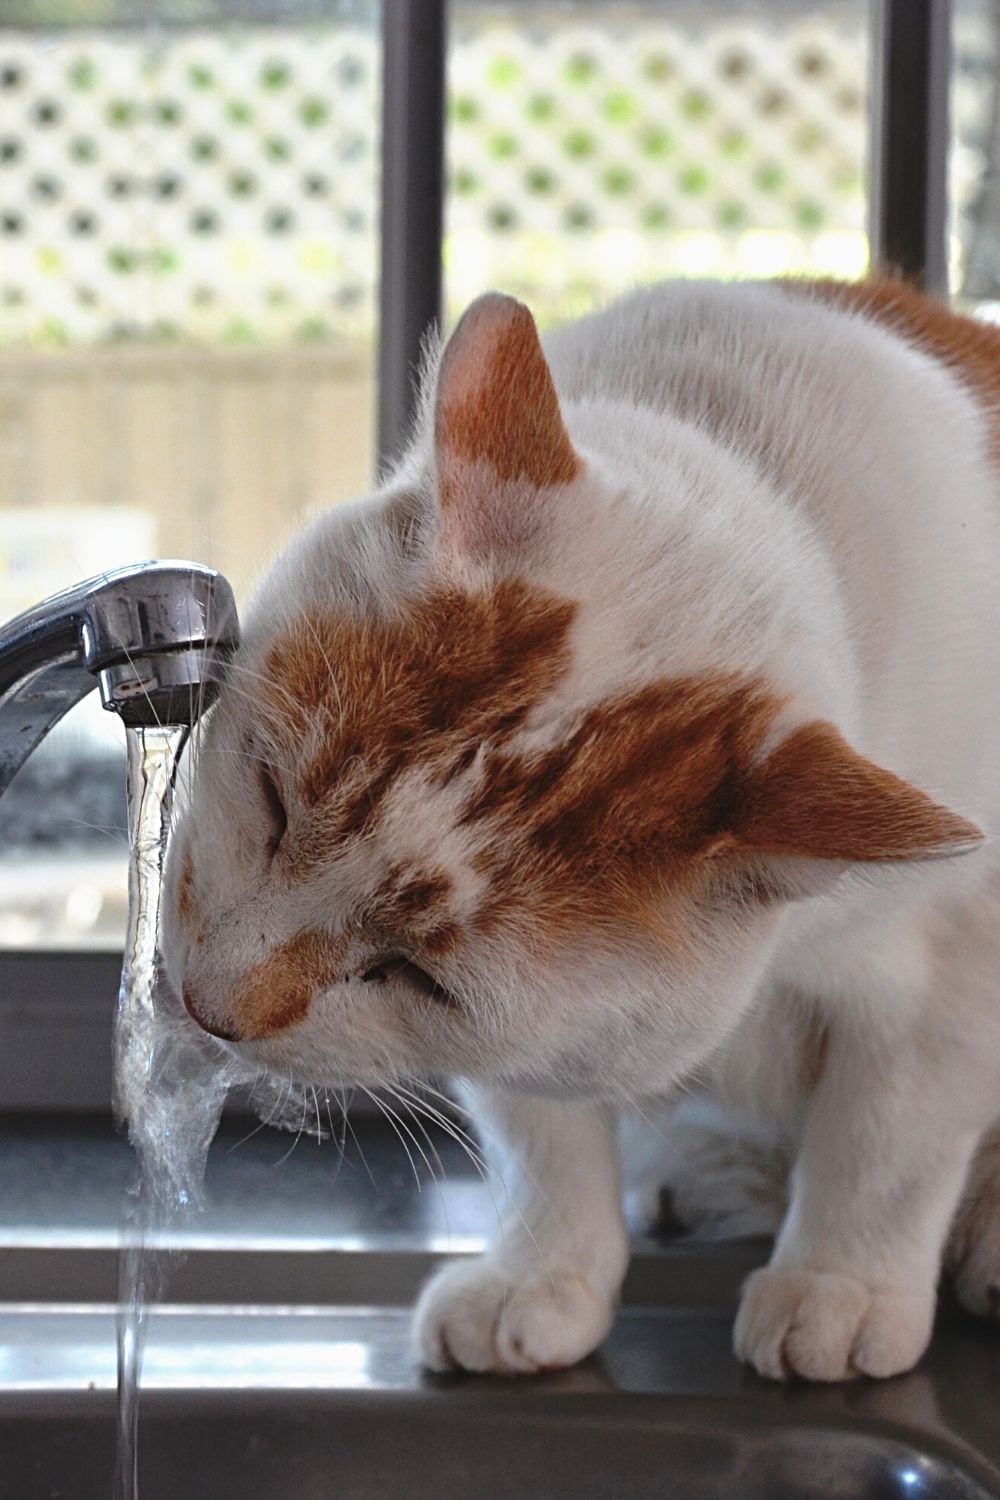 When Cats Drink, They Sometimes Miss Their Mouth